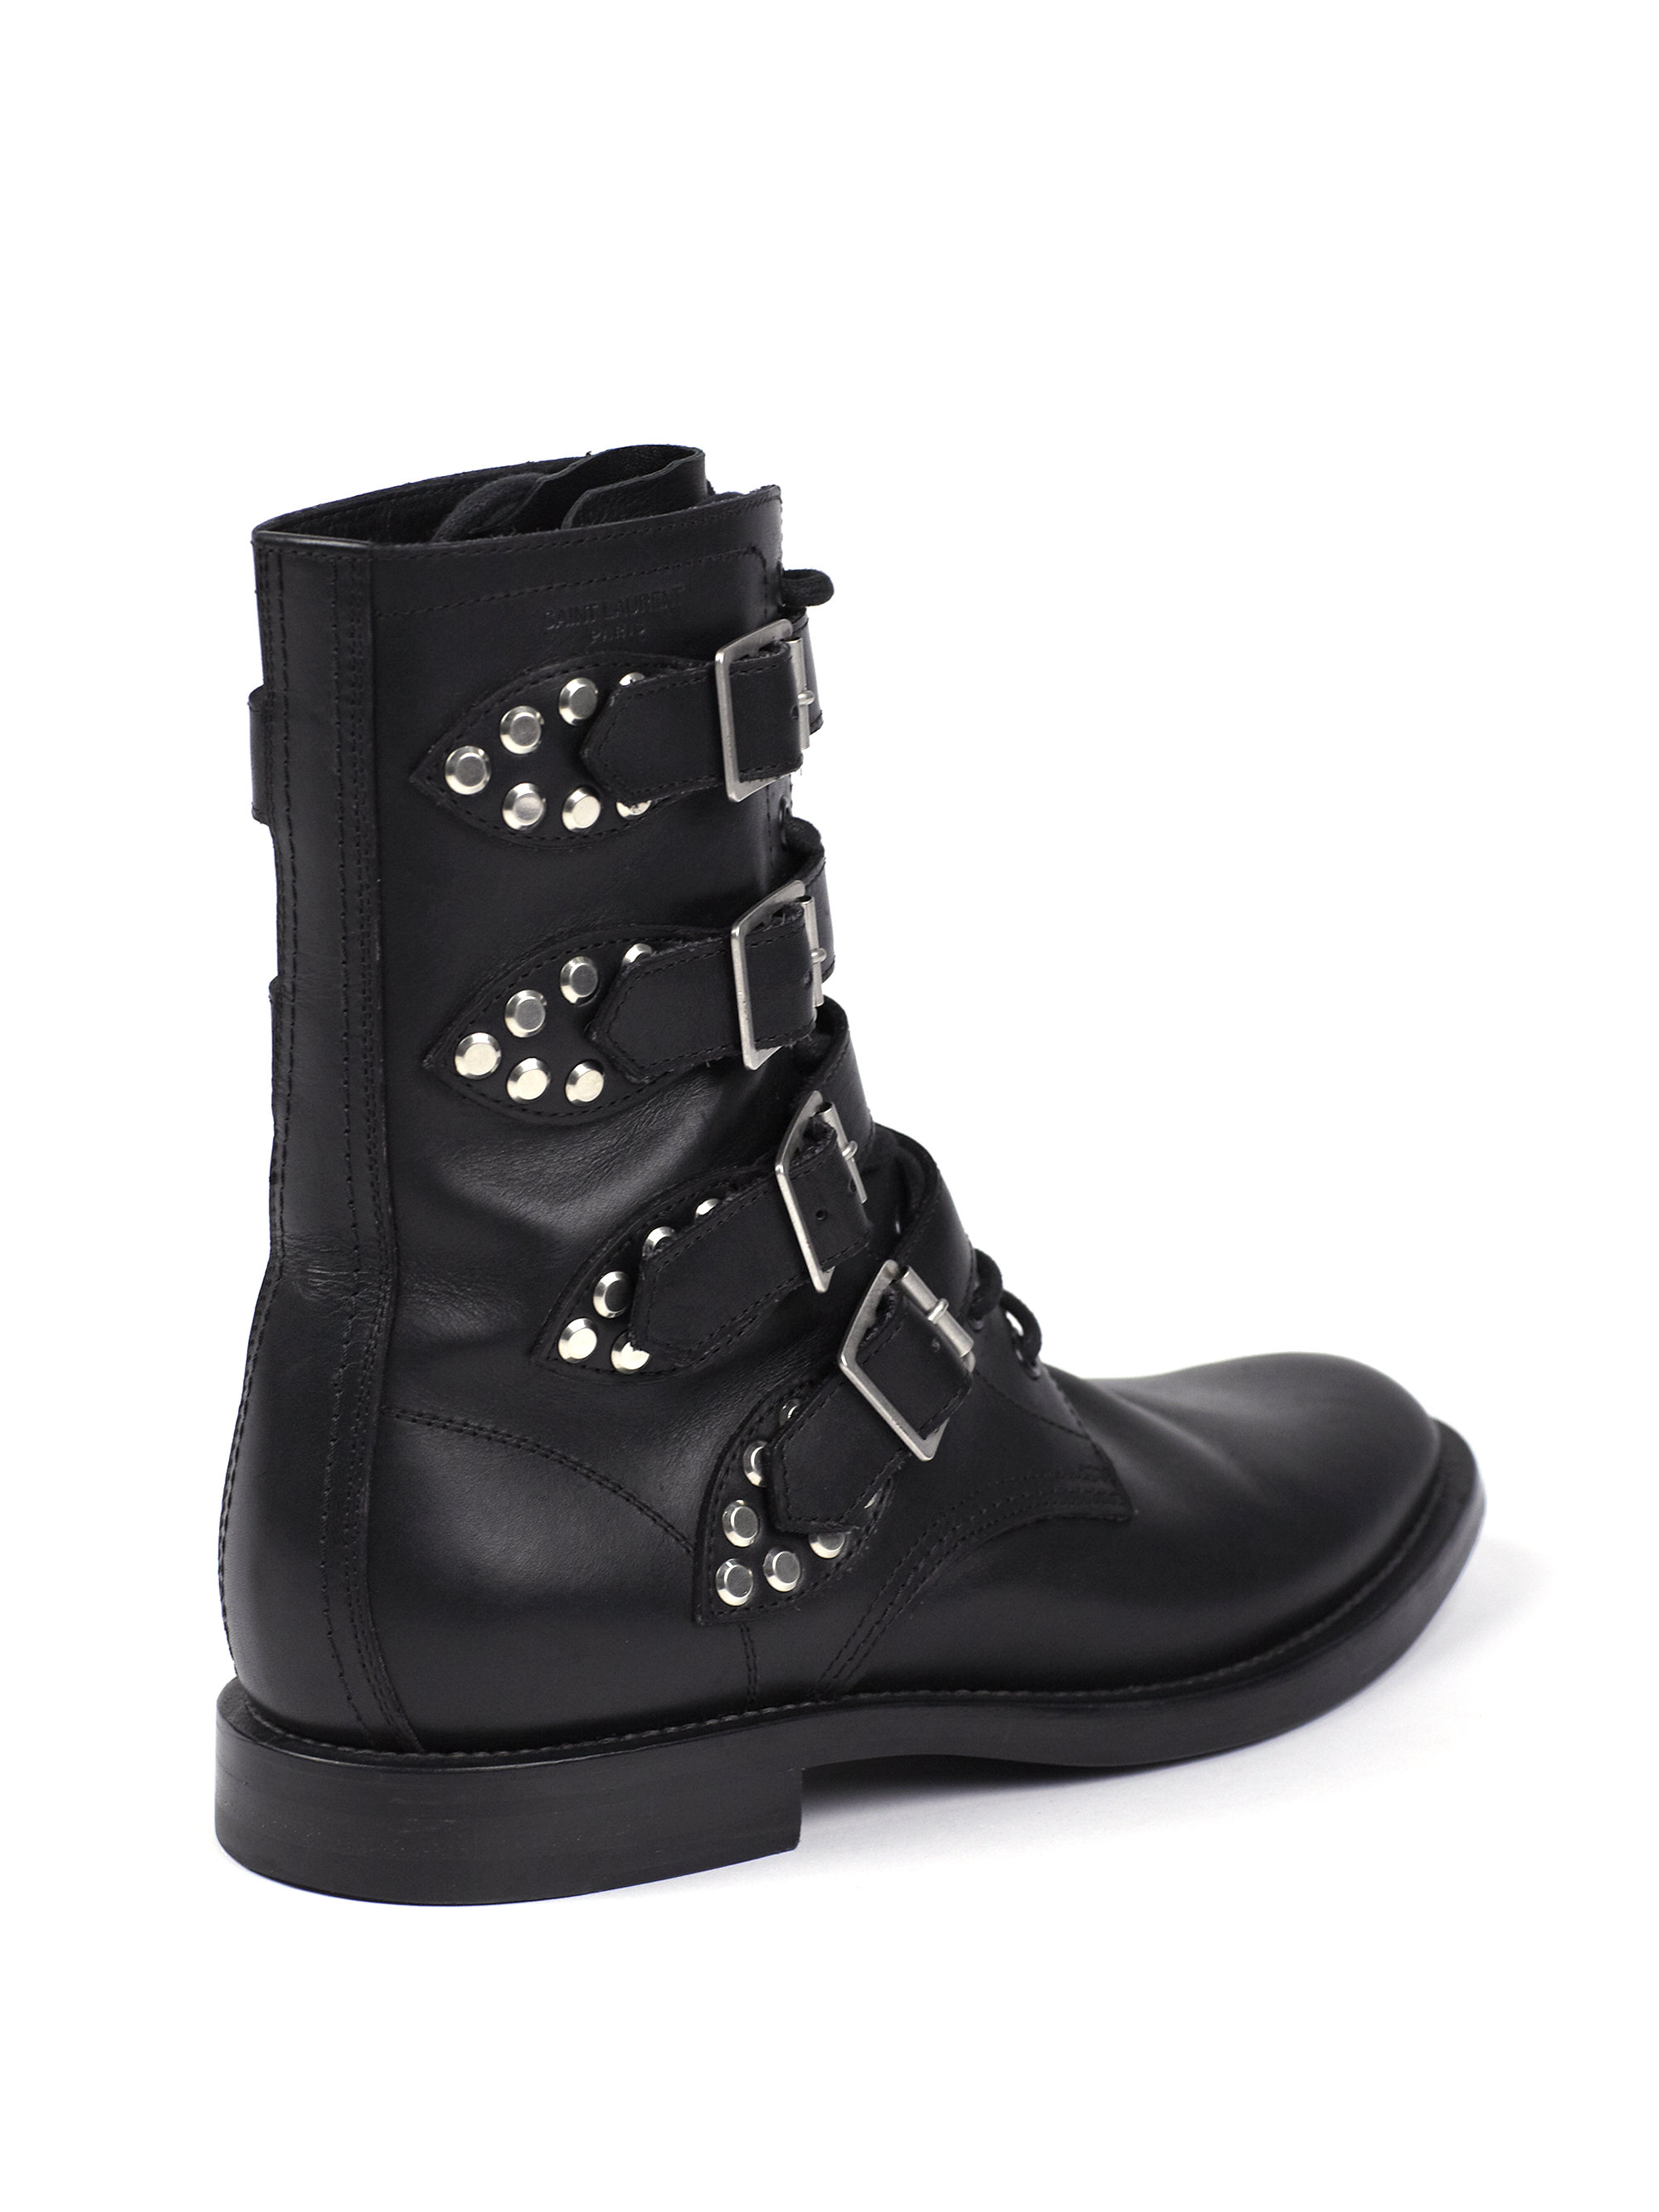 Saint laurent Rangers Studded Leather Ankle Boots in Black | Lyst